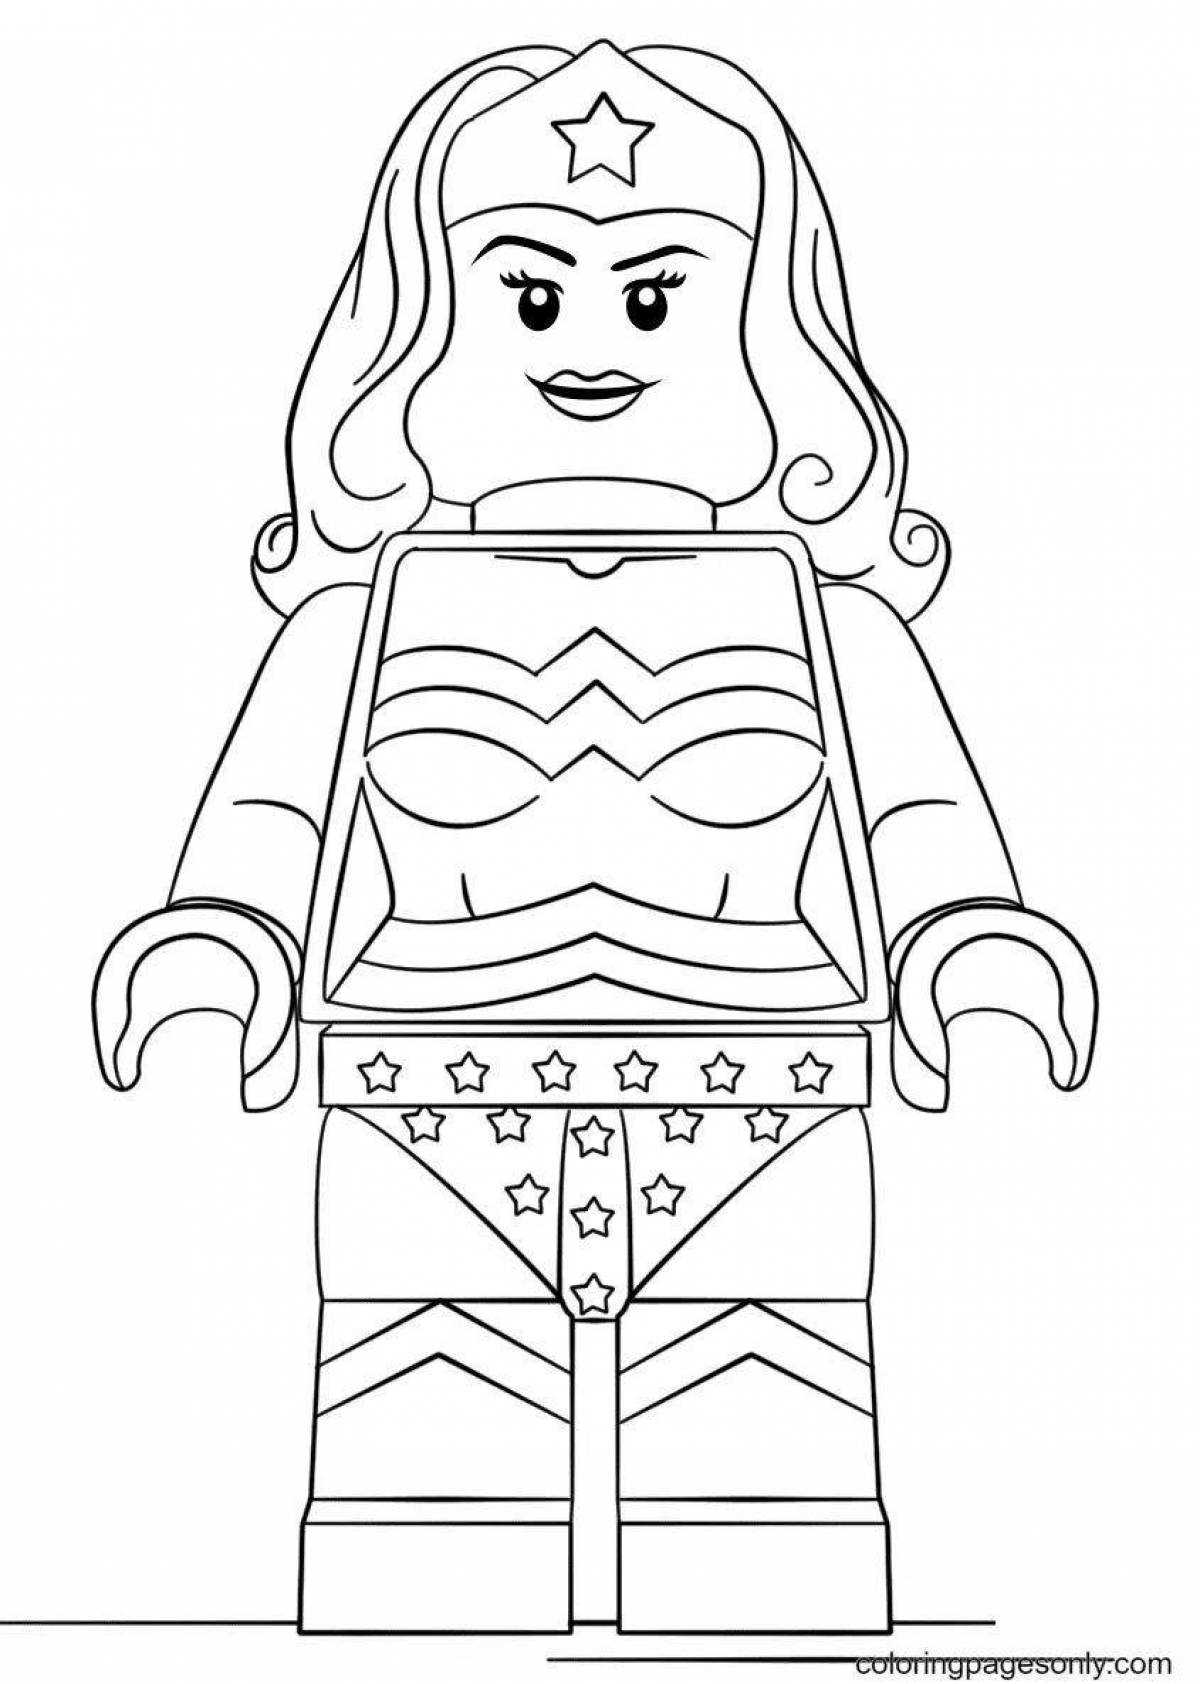 Coloring funny lego figures